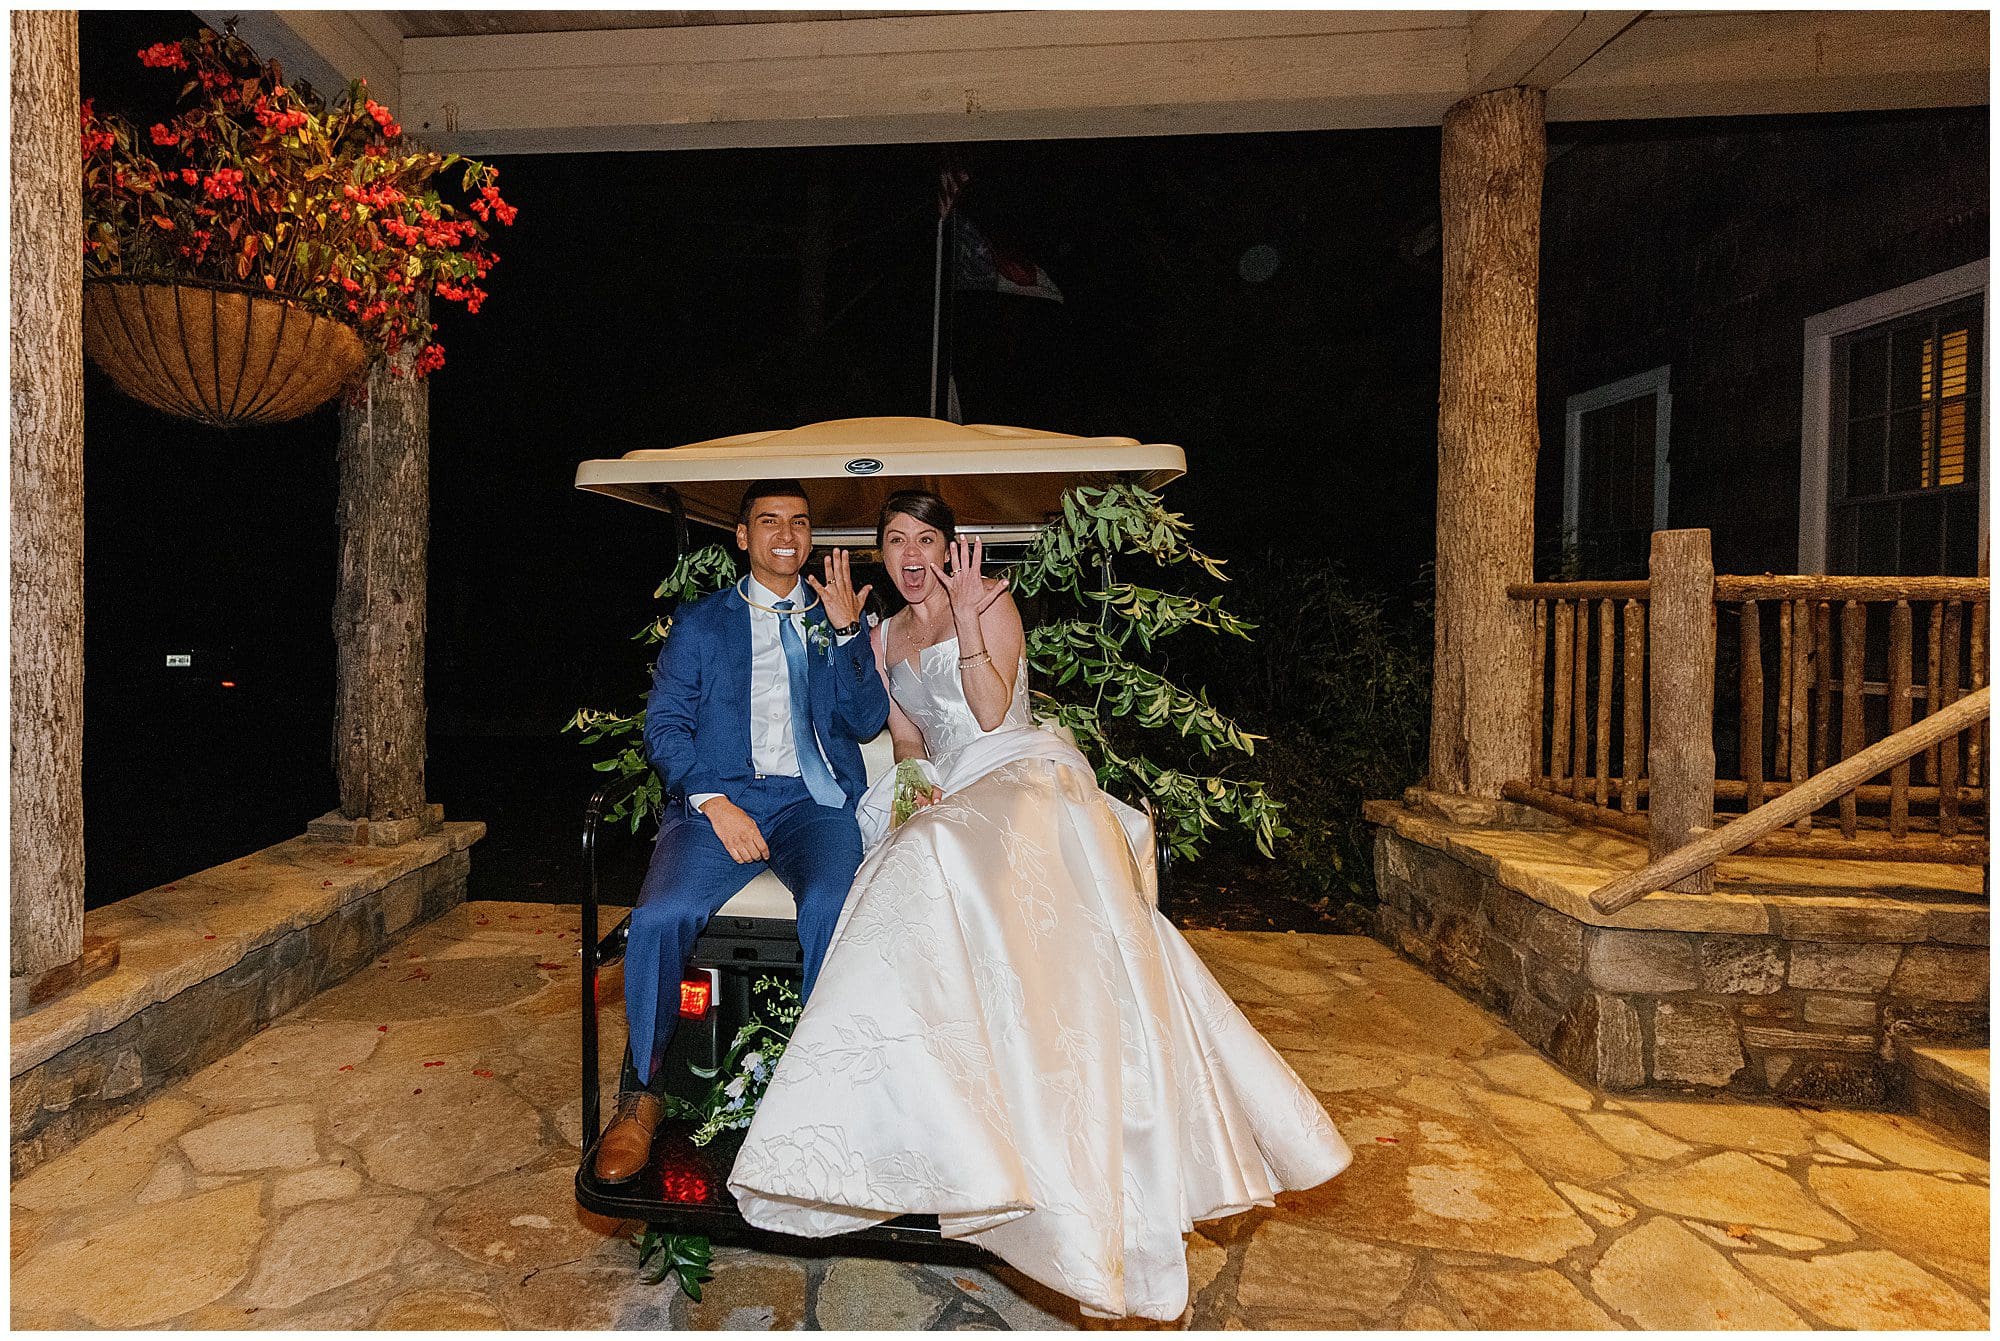 A bride and groom sitting on a golf cart at night.